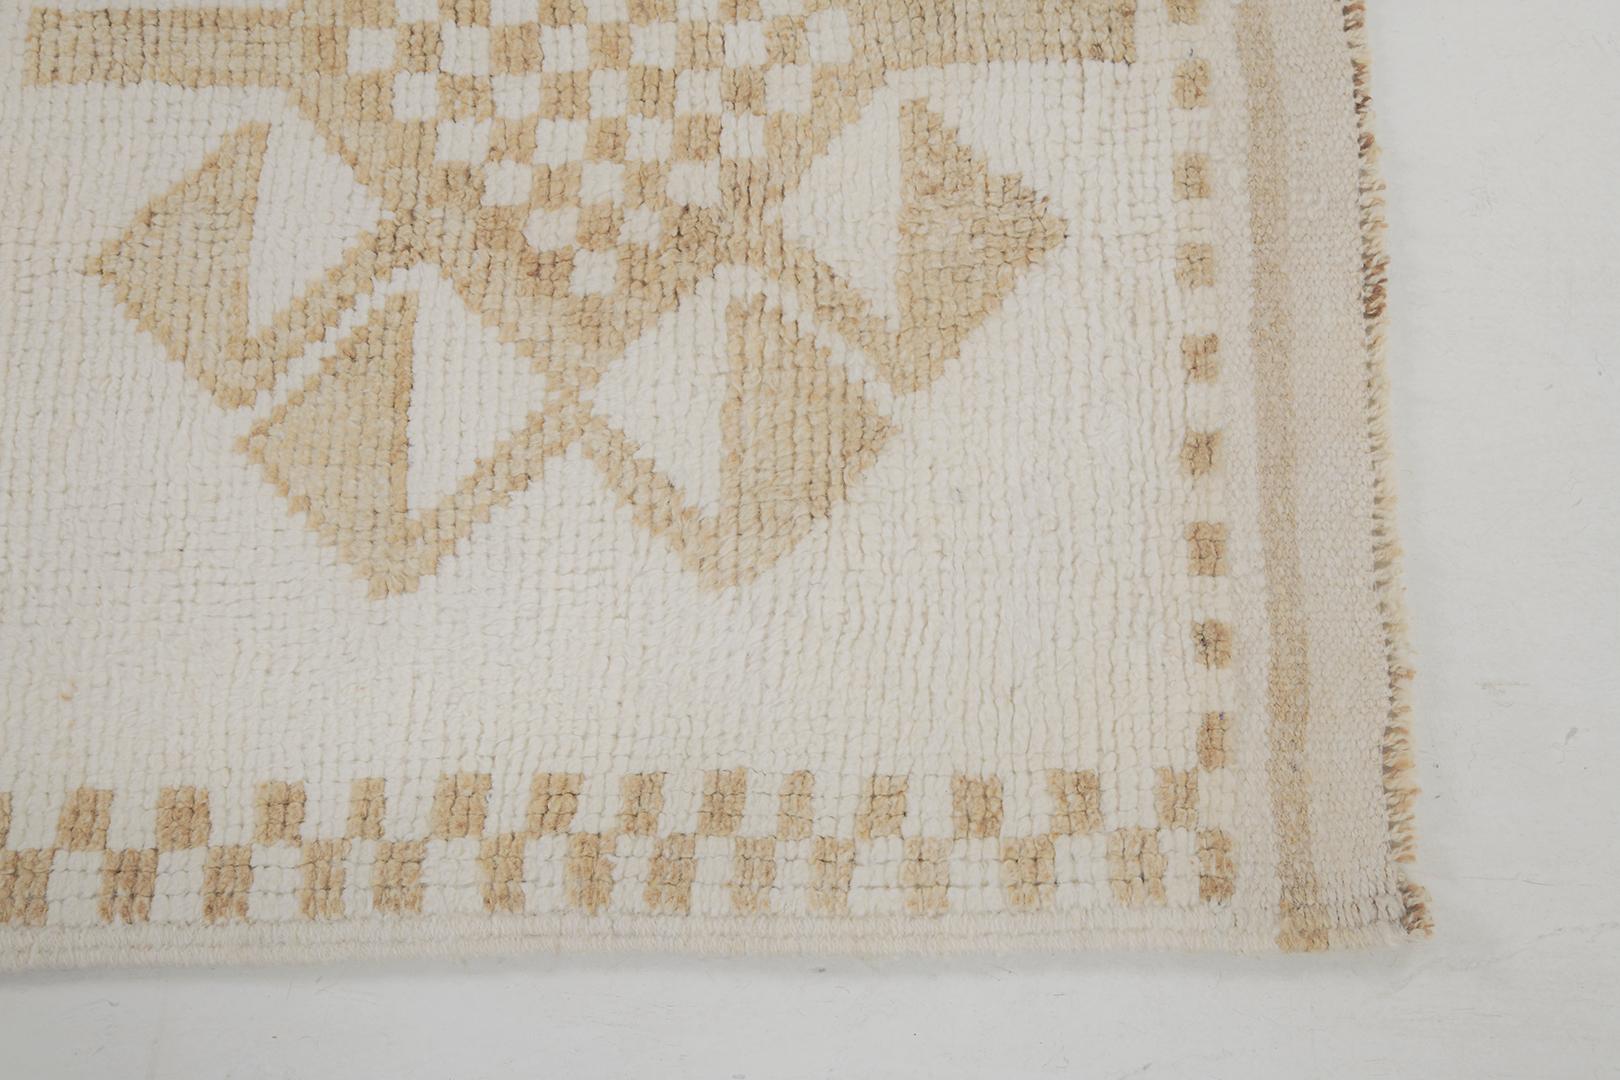 Featuring an exquisite captivating effect, this vintage Turkish Kurdish runner adds warmth and delicate aesthetic appeal forming a breathtaking interior. The textured field is covered in series of symbolical motifs across the tranquil composition.